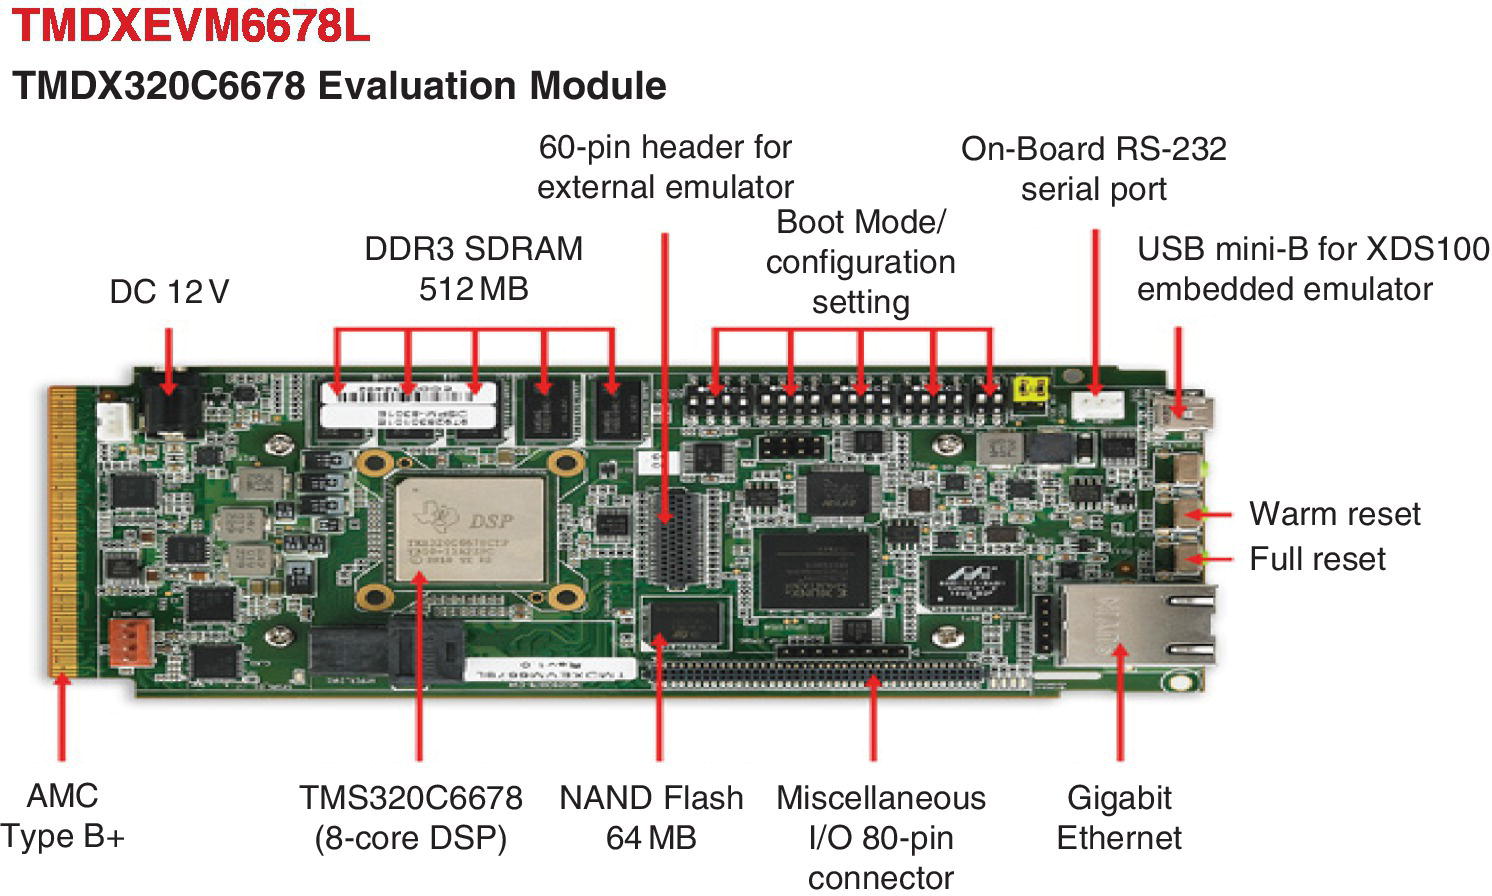 The TMS320C6678 EVM arrows depicting DC 12V, AMC type B+, DDR3 SDRAM 512MB, NAND flash 64MB, 60-pin header for external emulator, miscellaneous I/O 80-pin connector, and gigabit Ethernet etc.